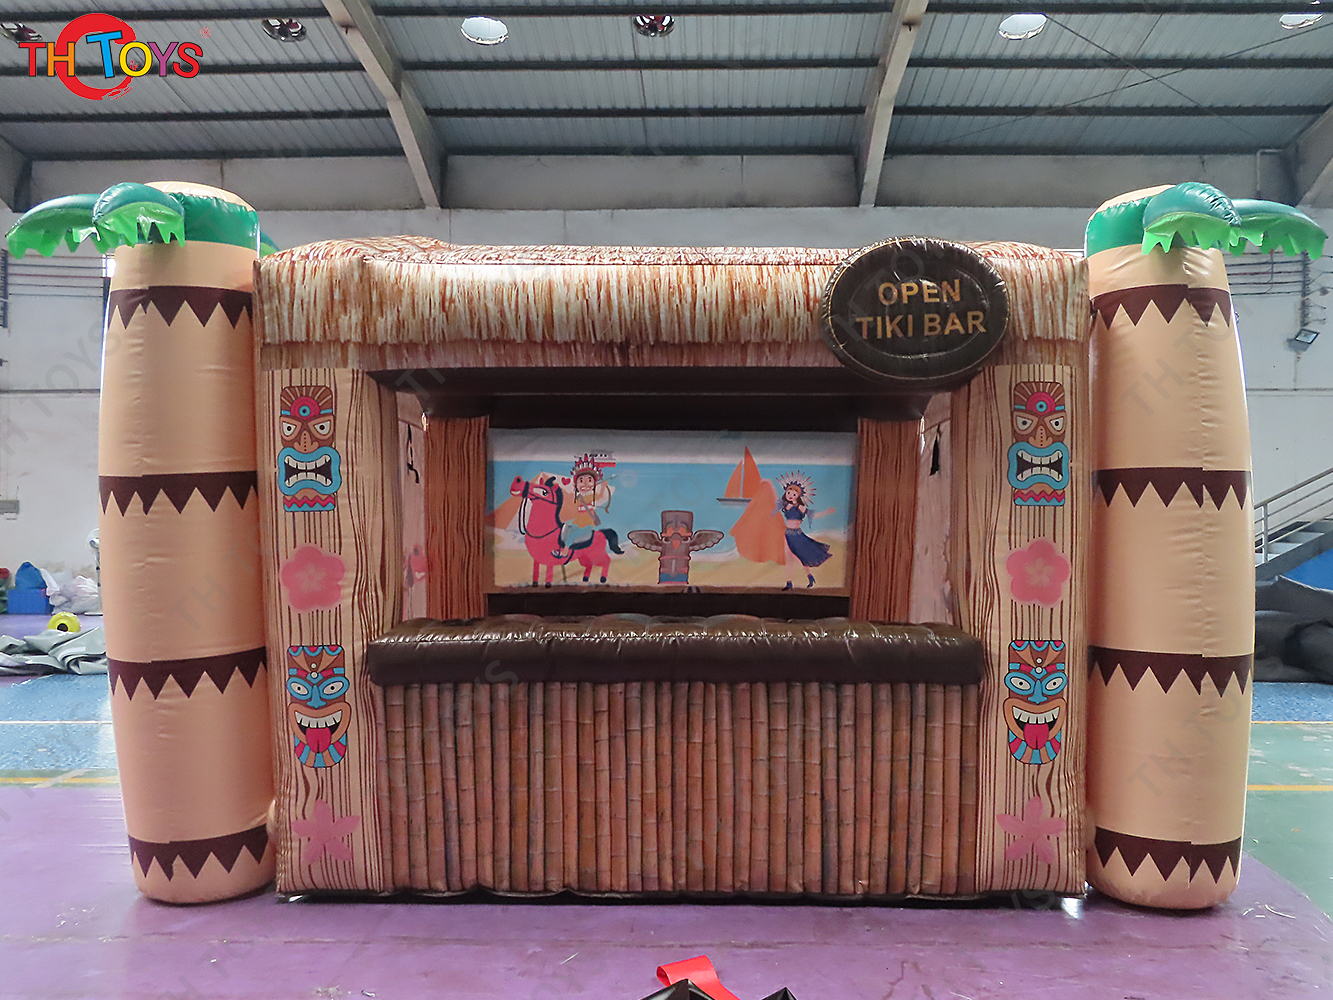 Tropic Inflatable Tiki Bar with Original Islander Backdrop Bamboo Fence and Coconut Tree for Vacation